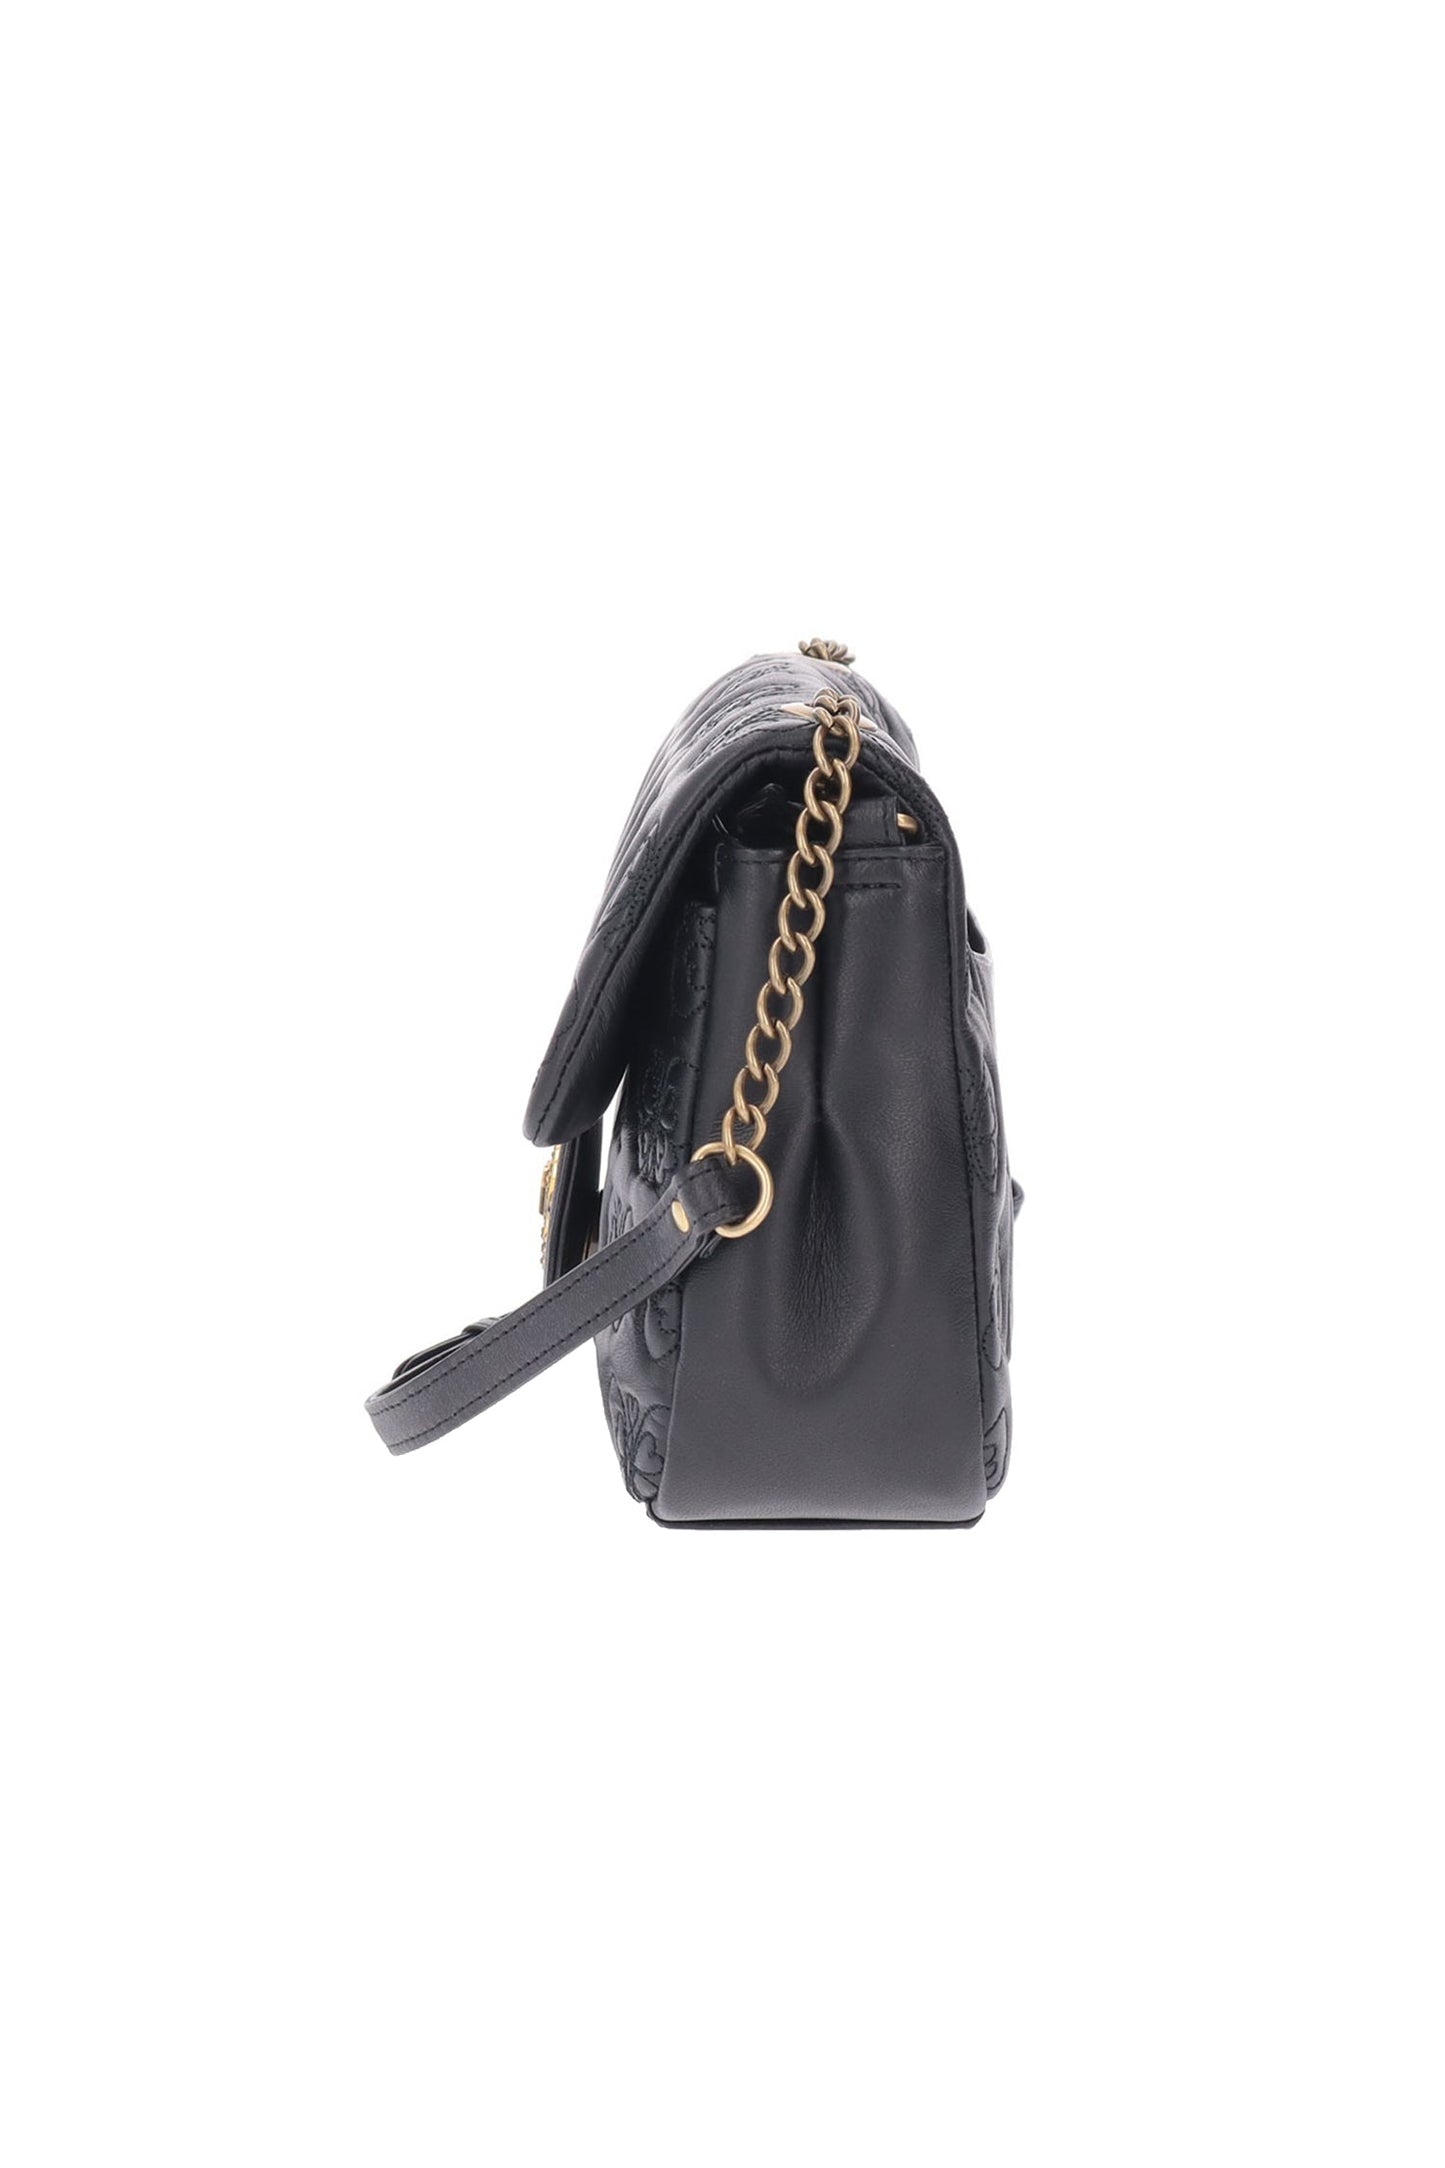 Chase Crossbody lather shoulder strap is attached to the bag with a golden large links chain 